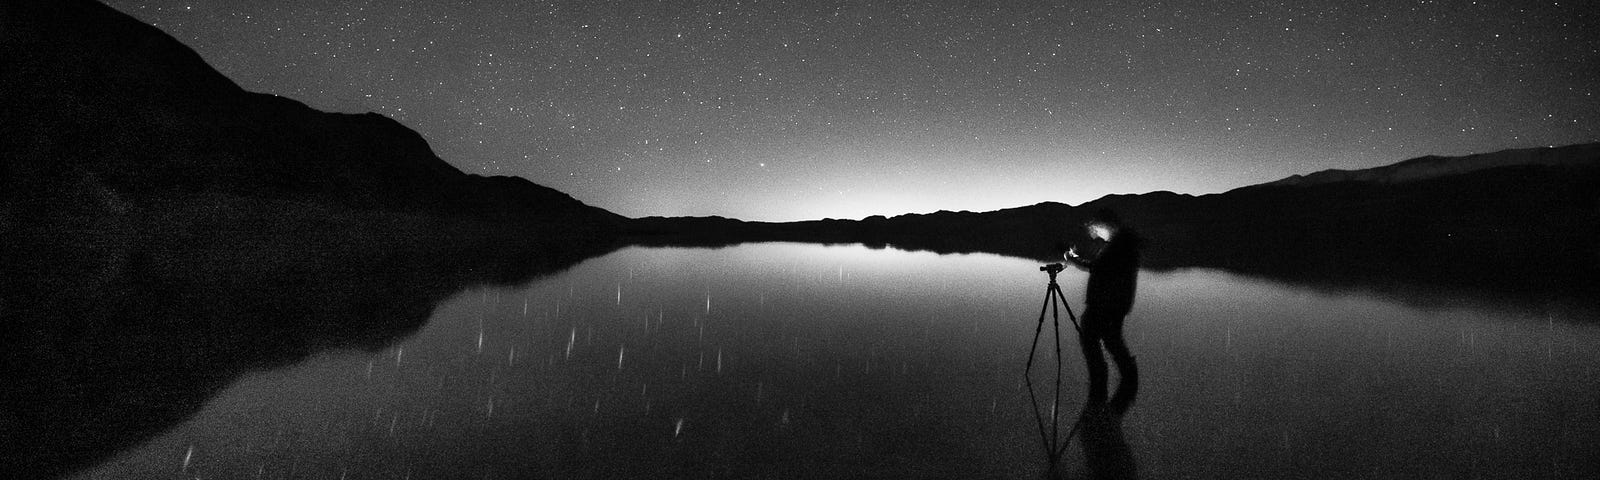 A fellow friend and photographer stands in temporary Lake Manly, Death Valley, as we work together to photograph the stars and Milky Way in early morning.